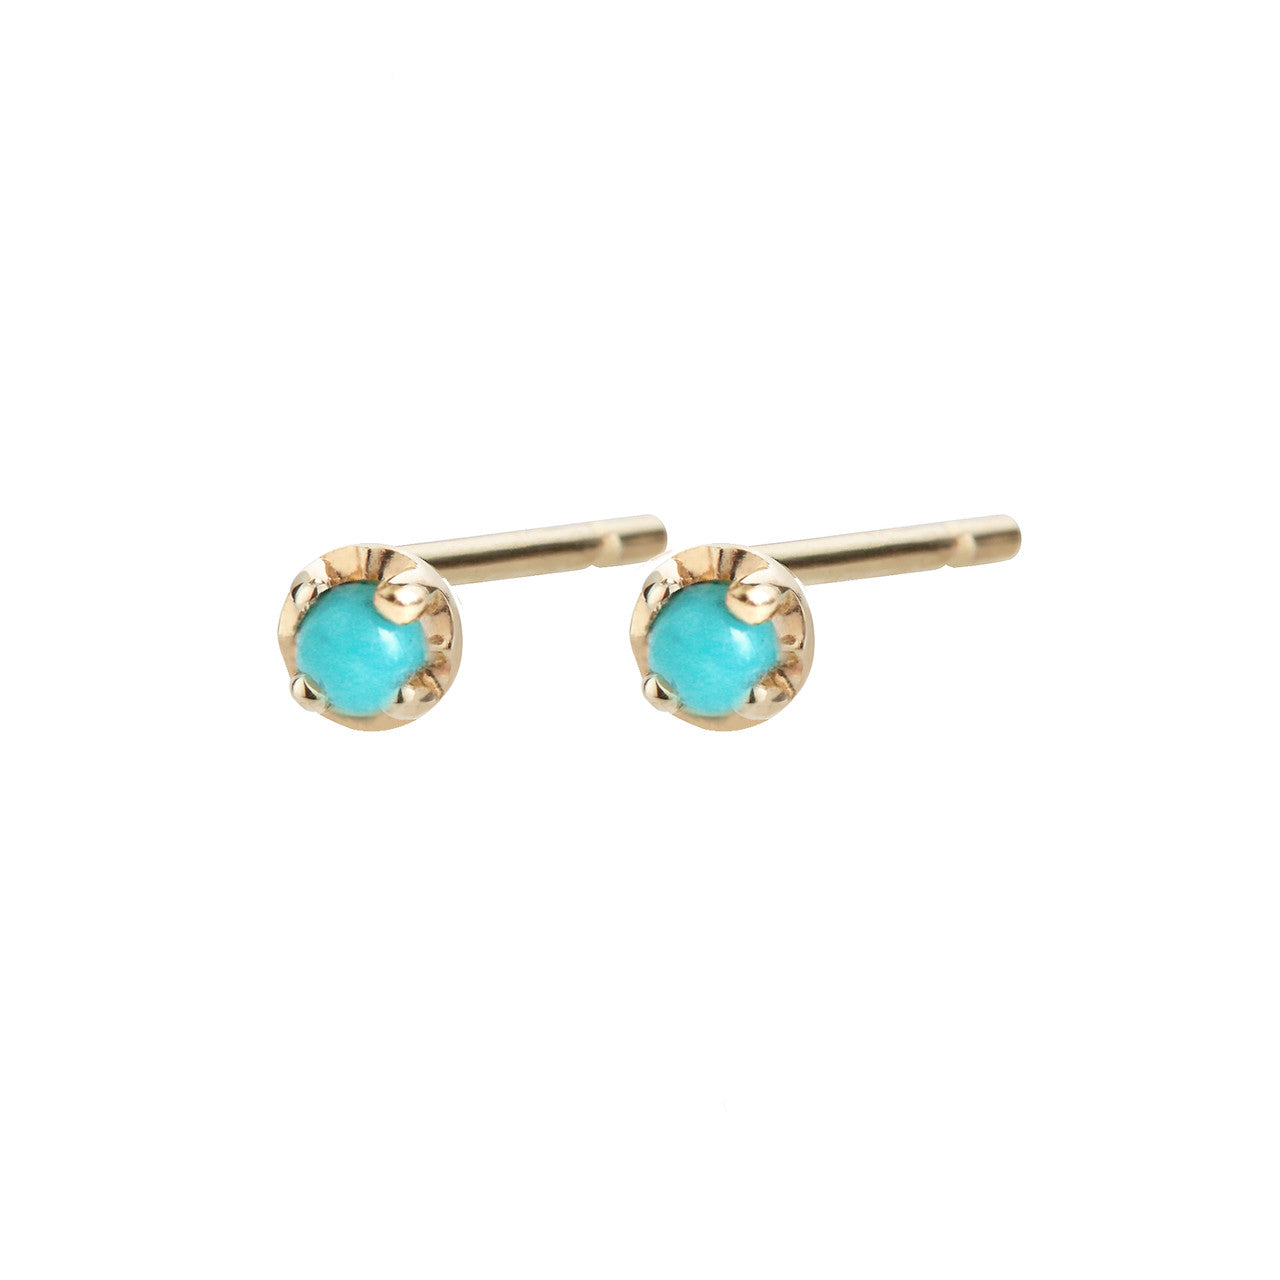 Small prong studs, turquoise